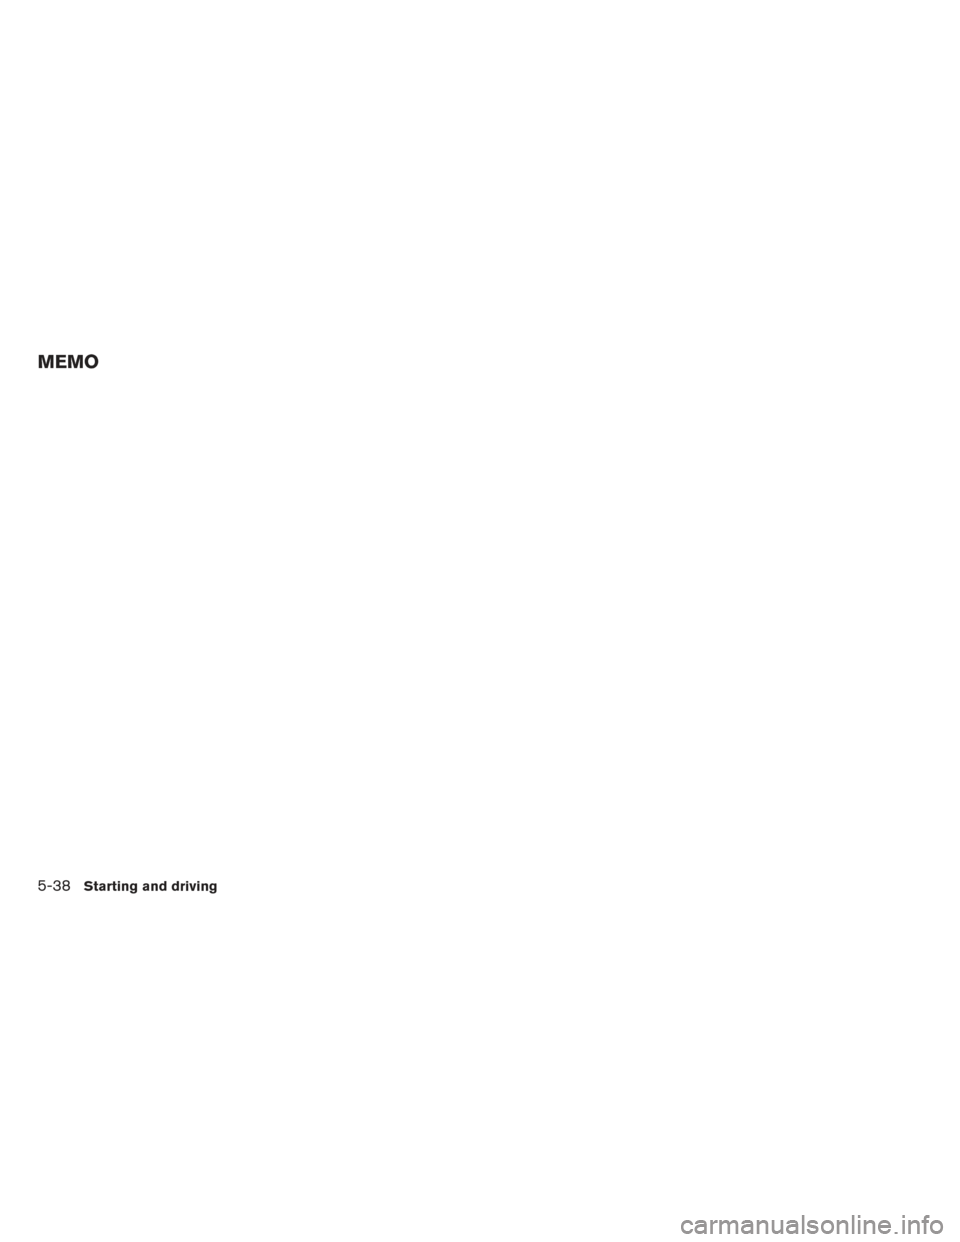 NISSAN ALTIMA 2014 L33 / 5.G Owners Manual MEMO
5-38Starting and driving 